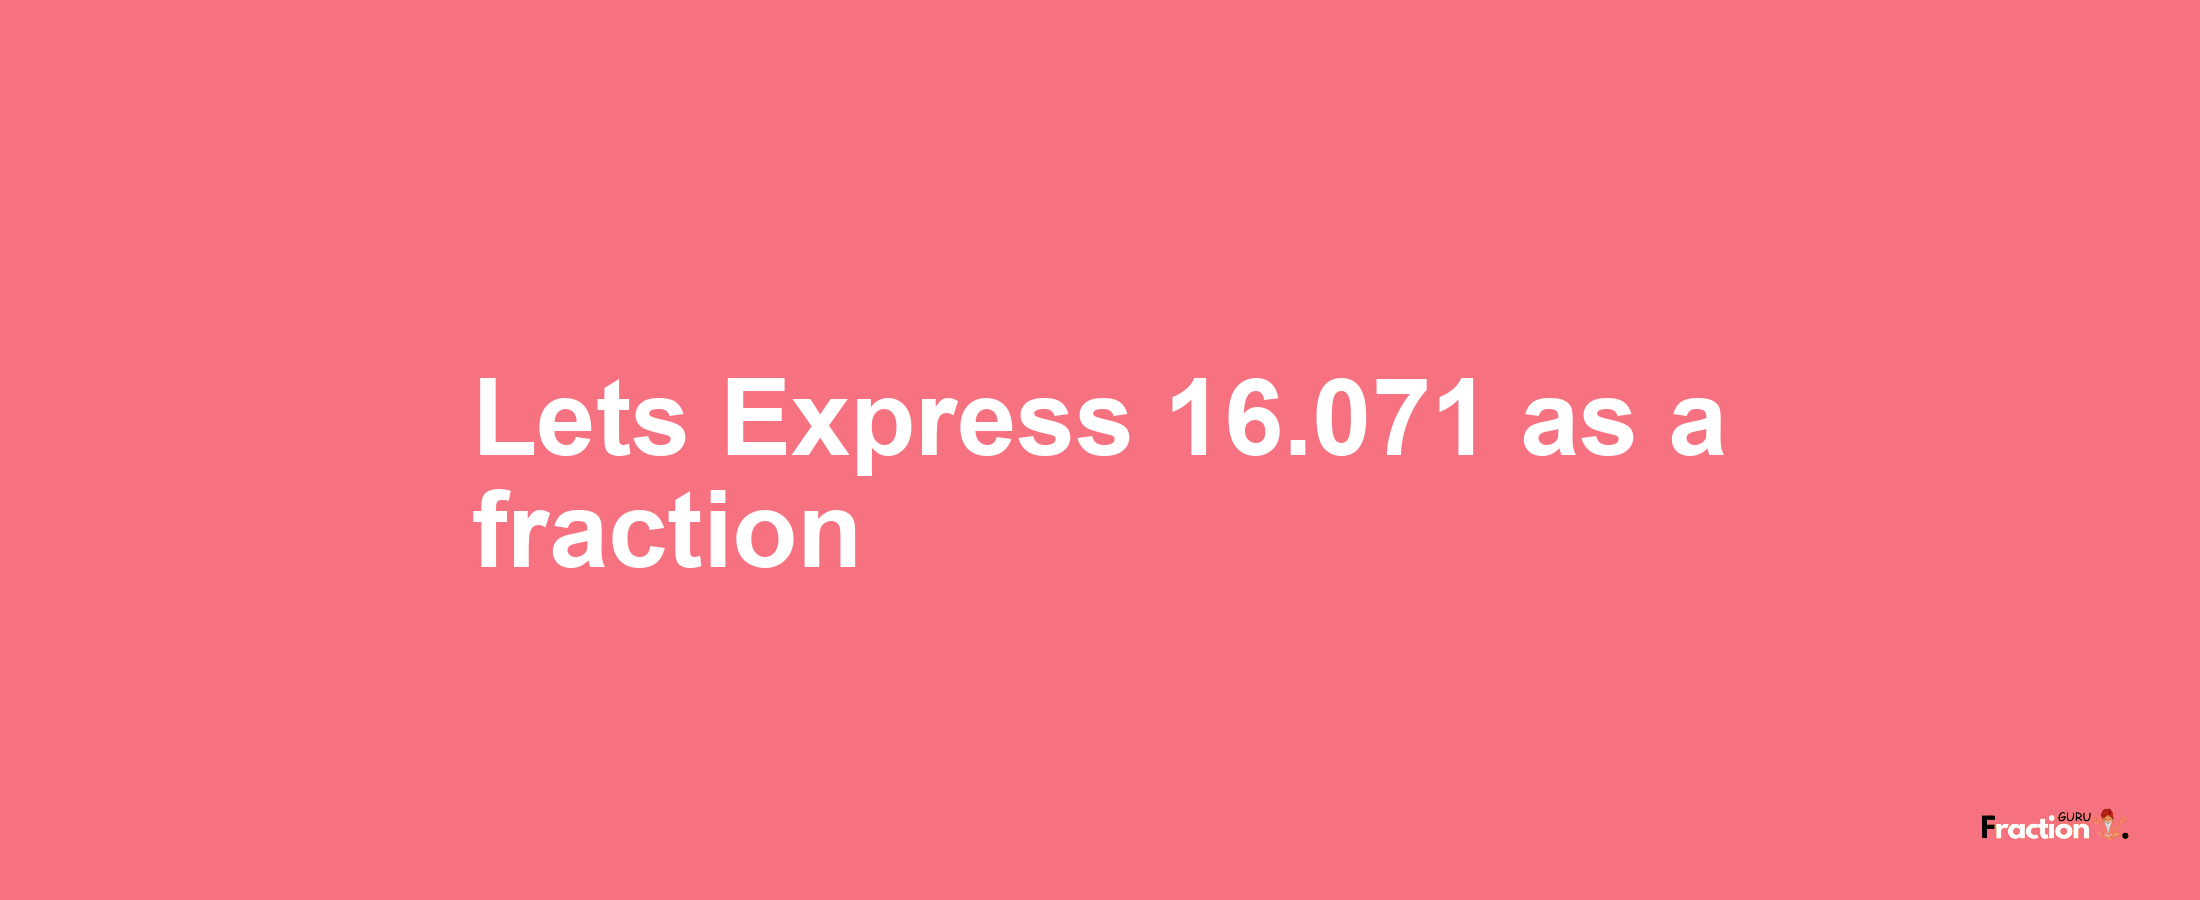 Lets Express 16.071 as afraction